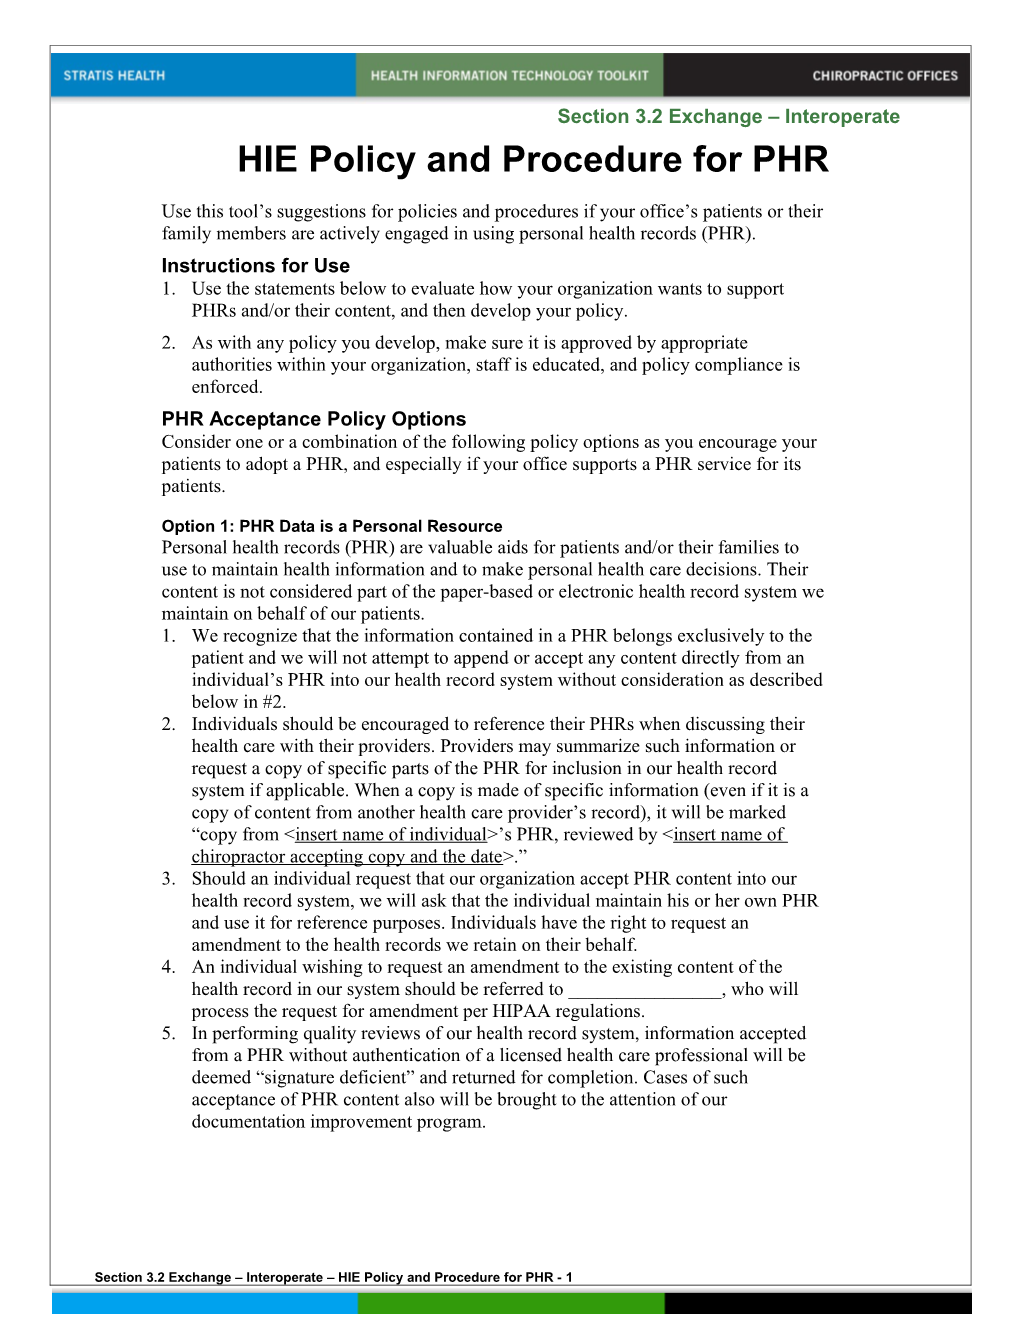 3.1 HIE Policy and Procedure for PHR